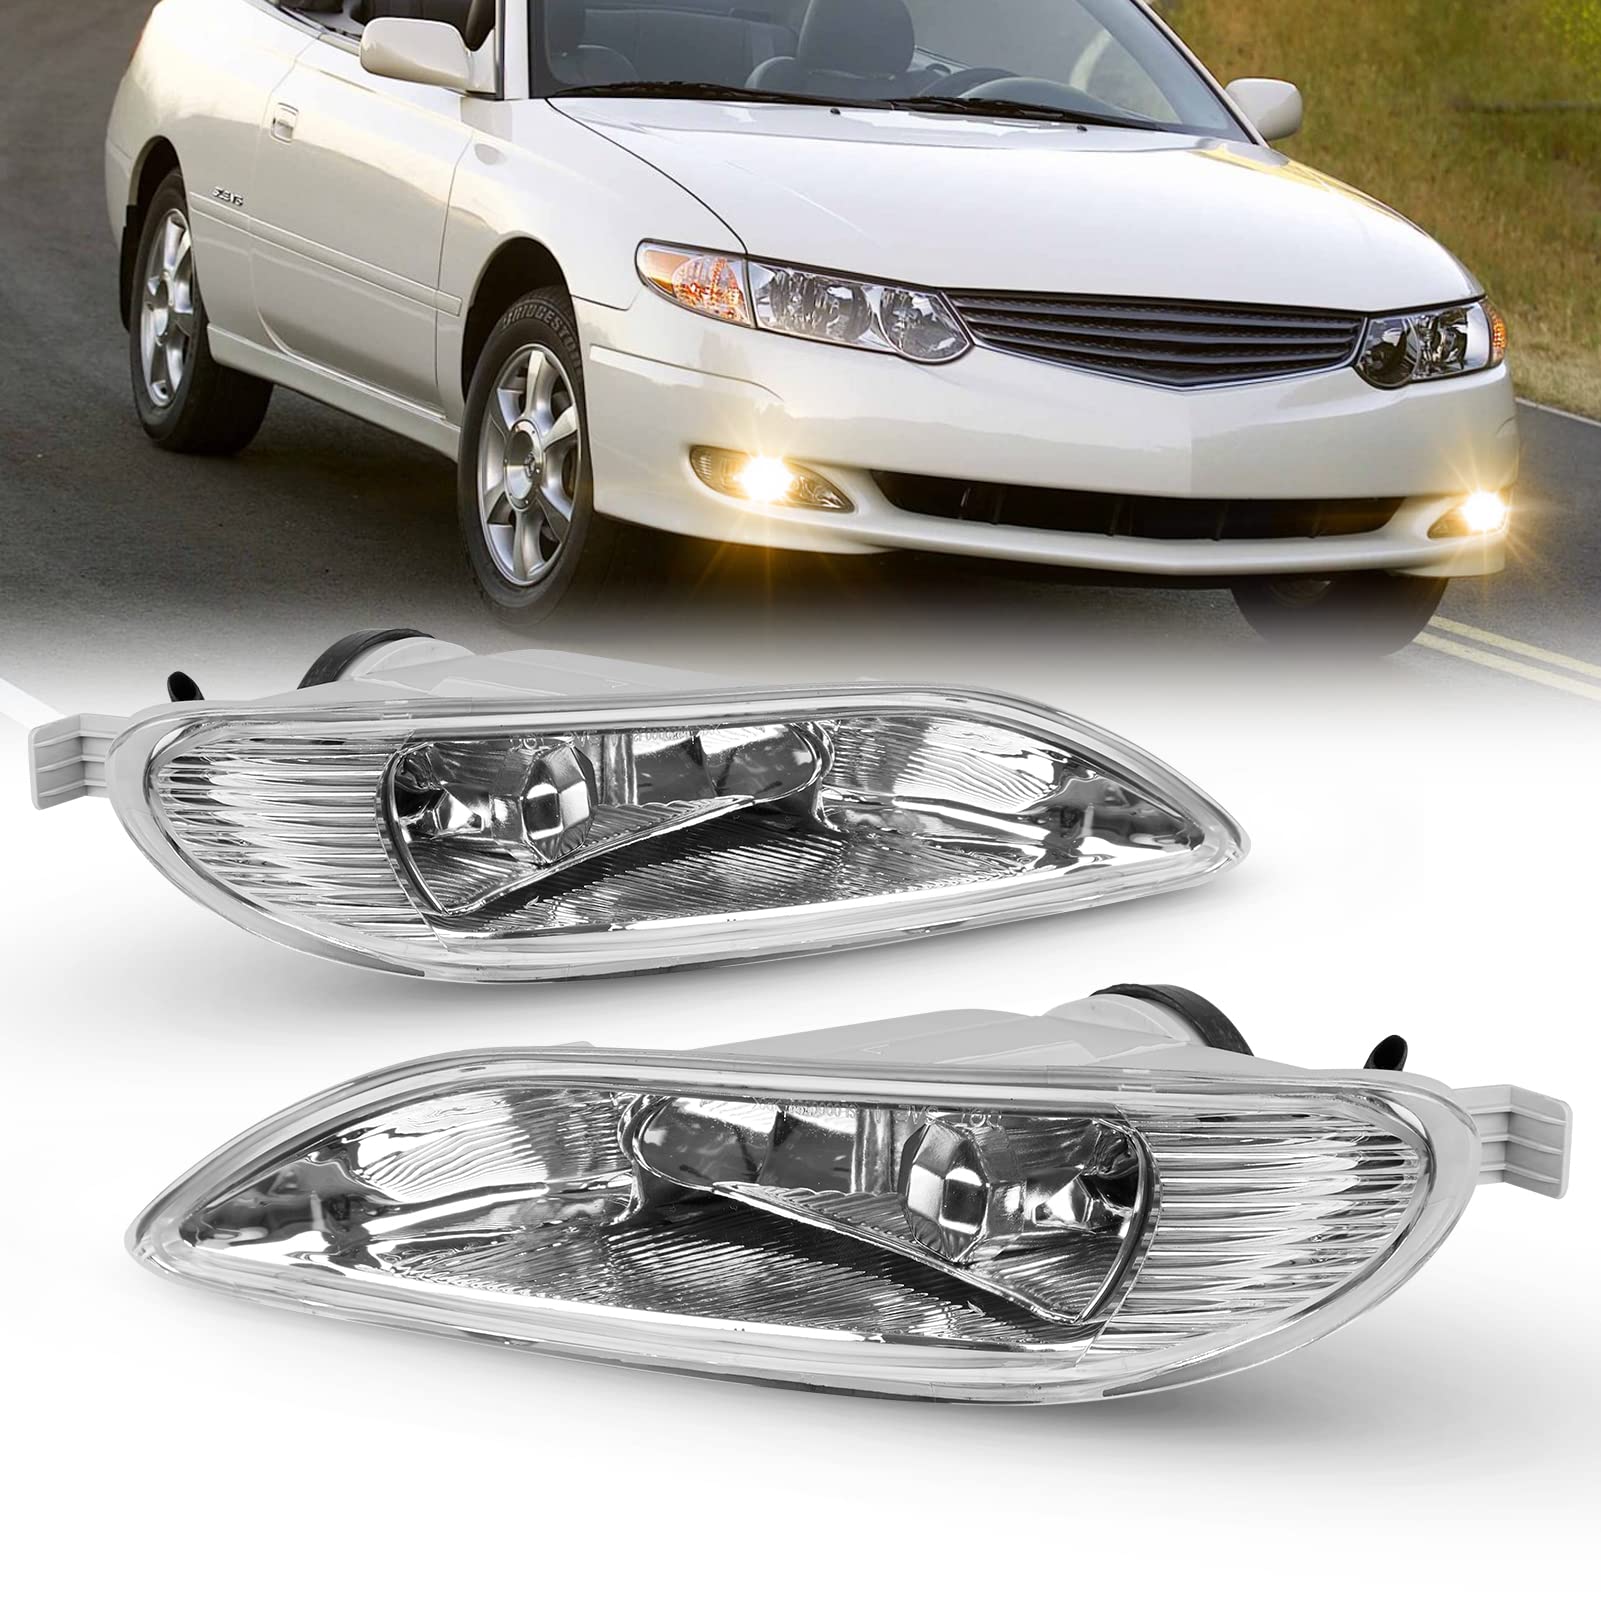 Amazon.com: WEZEMLIGHT Fog Lights Compatible with 2002-2003 Toyota Solara  2005-2008 Toyota Corolla 2002-2004 Toyota Camry With 9006 12V 55W Halogen  Bulbs Included Switch And Wiring Kit -1 Set : Automotive